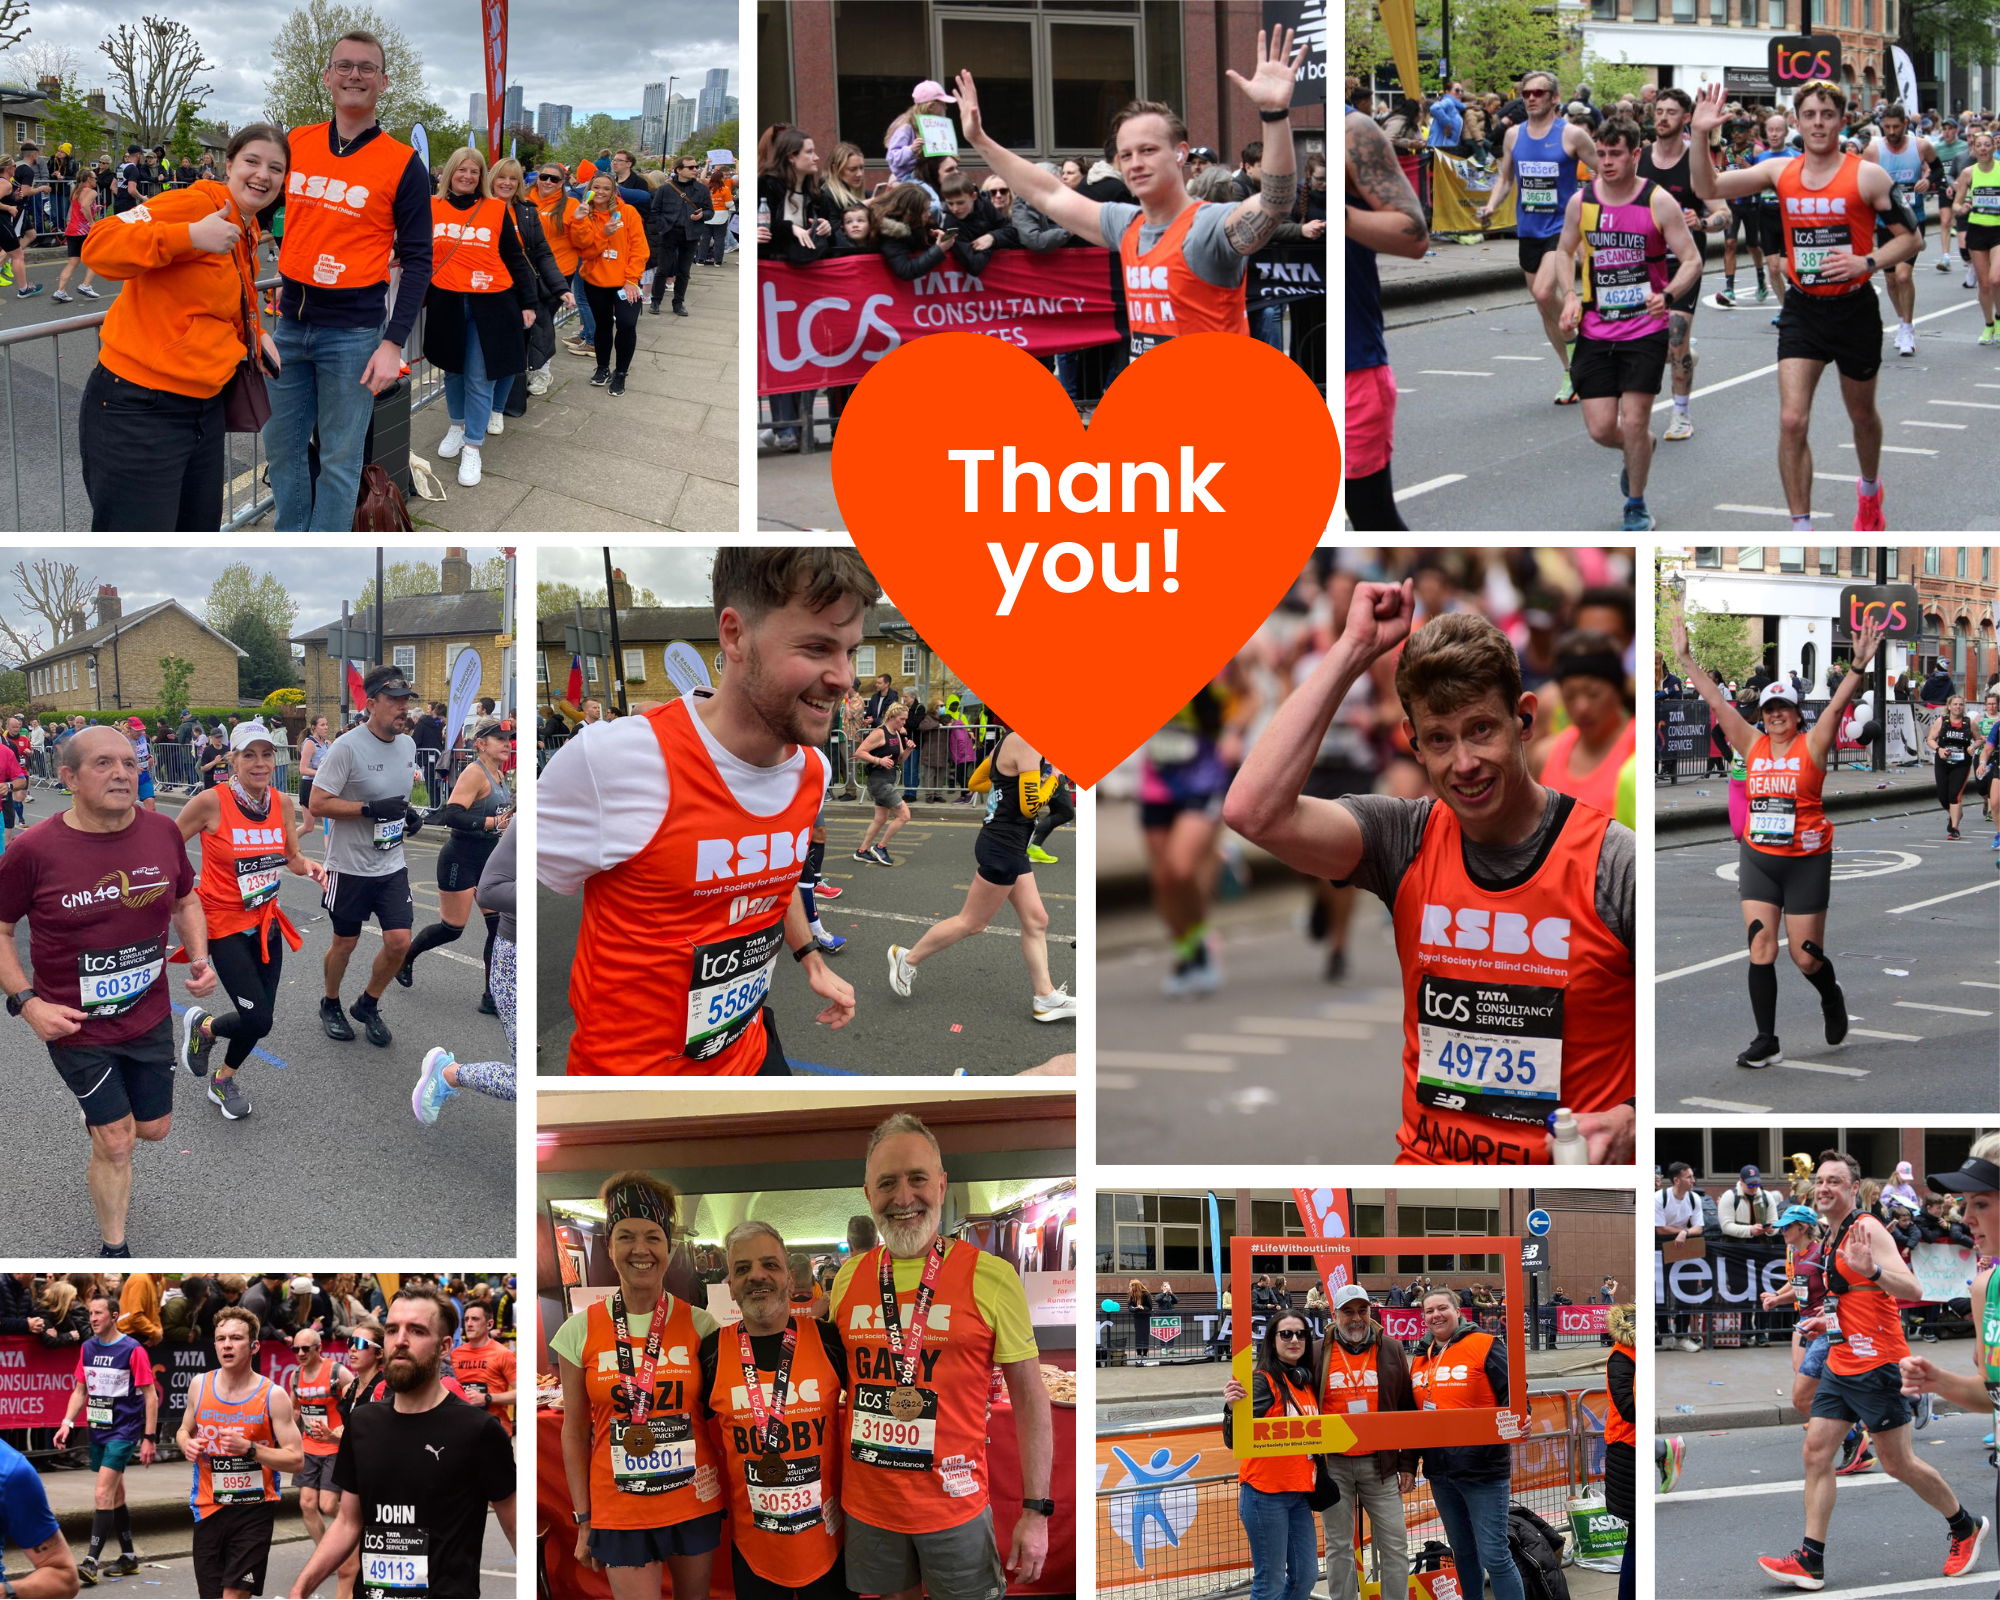 A photo album of 11 images from the London Marathon. Overlayed on 3 images is an orange love heart with the words "Thank you!" The photos are group shots of volunteers, runners on the street of London, runners with a Selfie frame and runners posing with their medals.